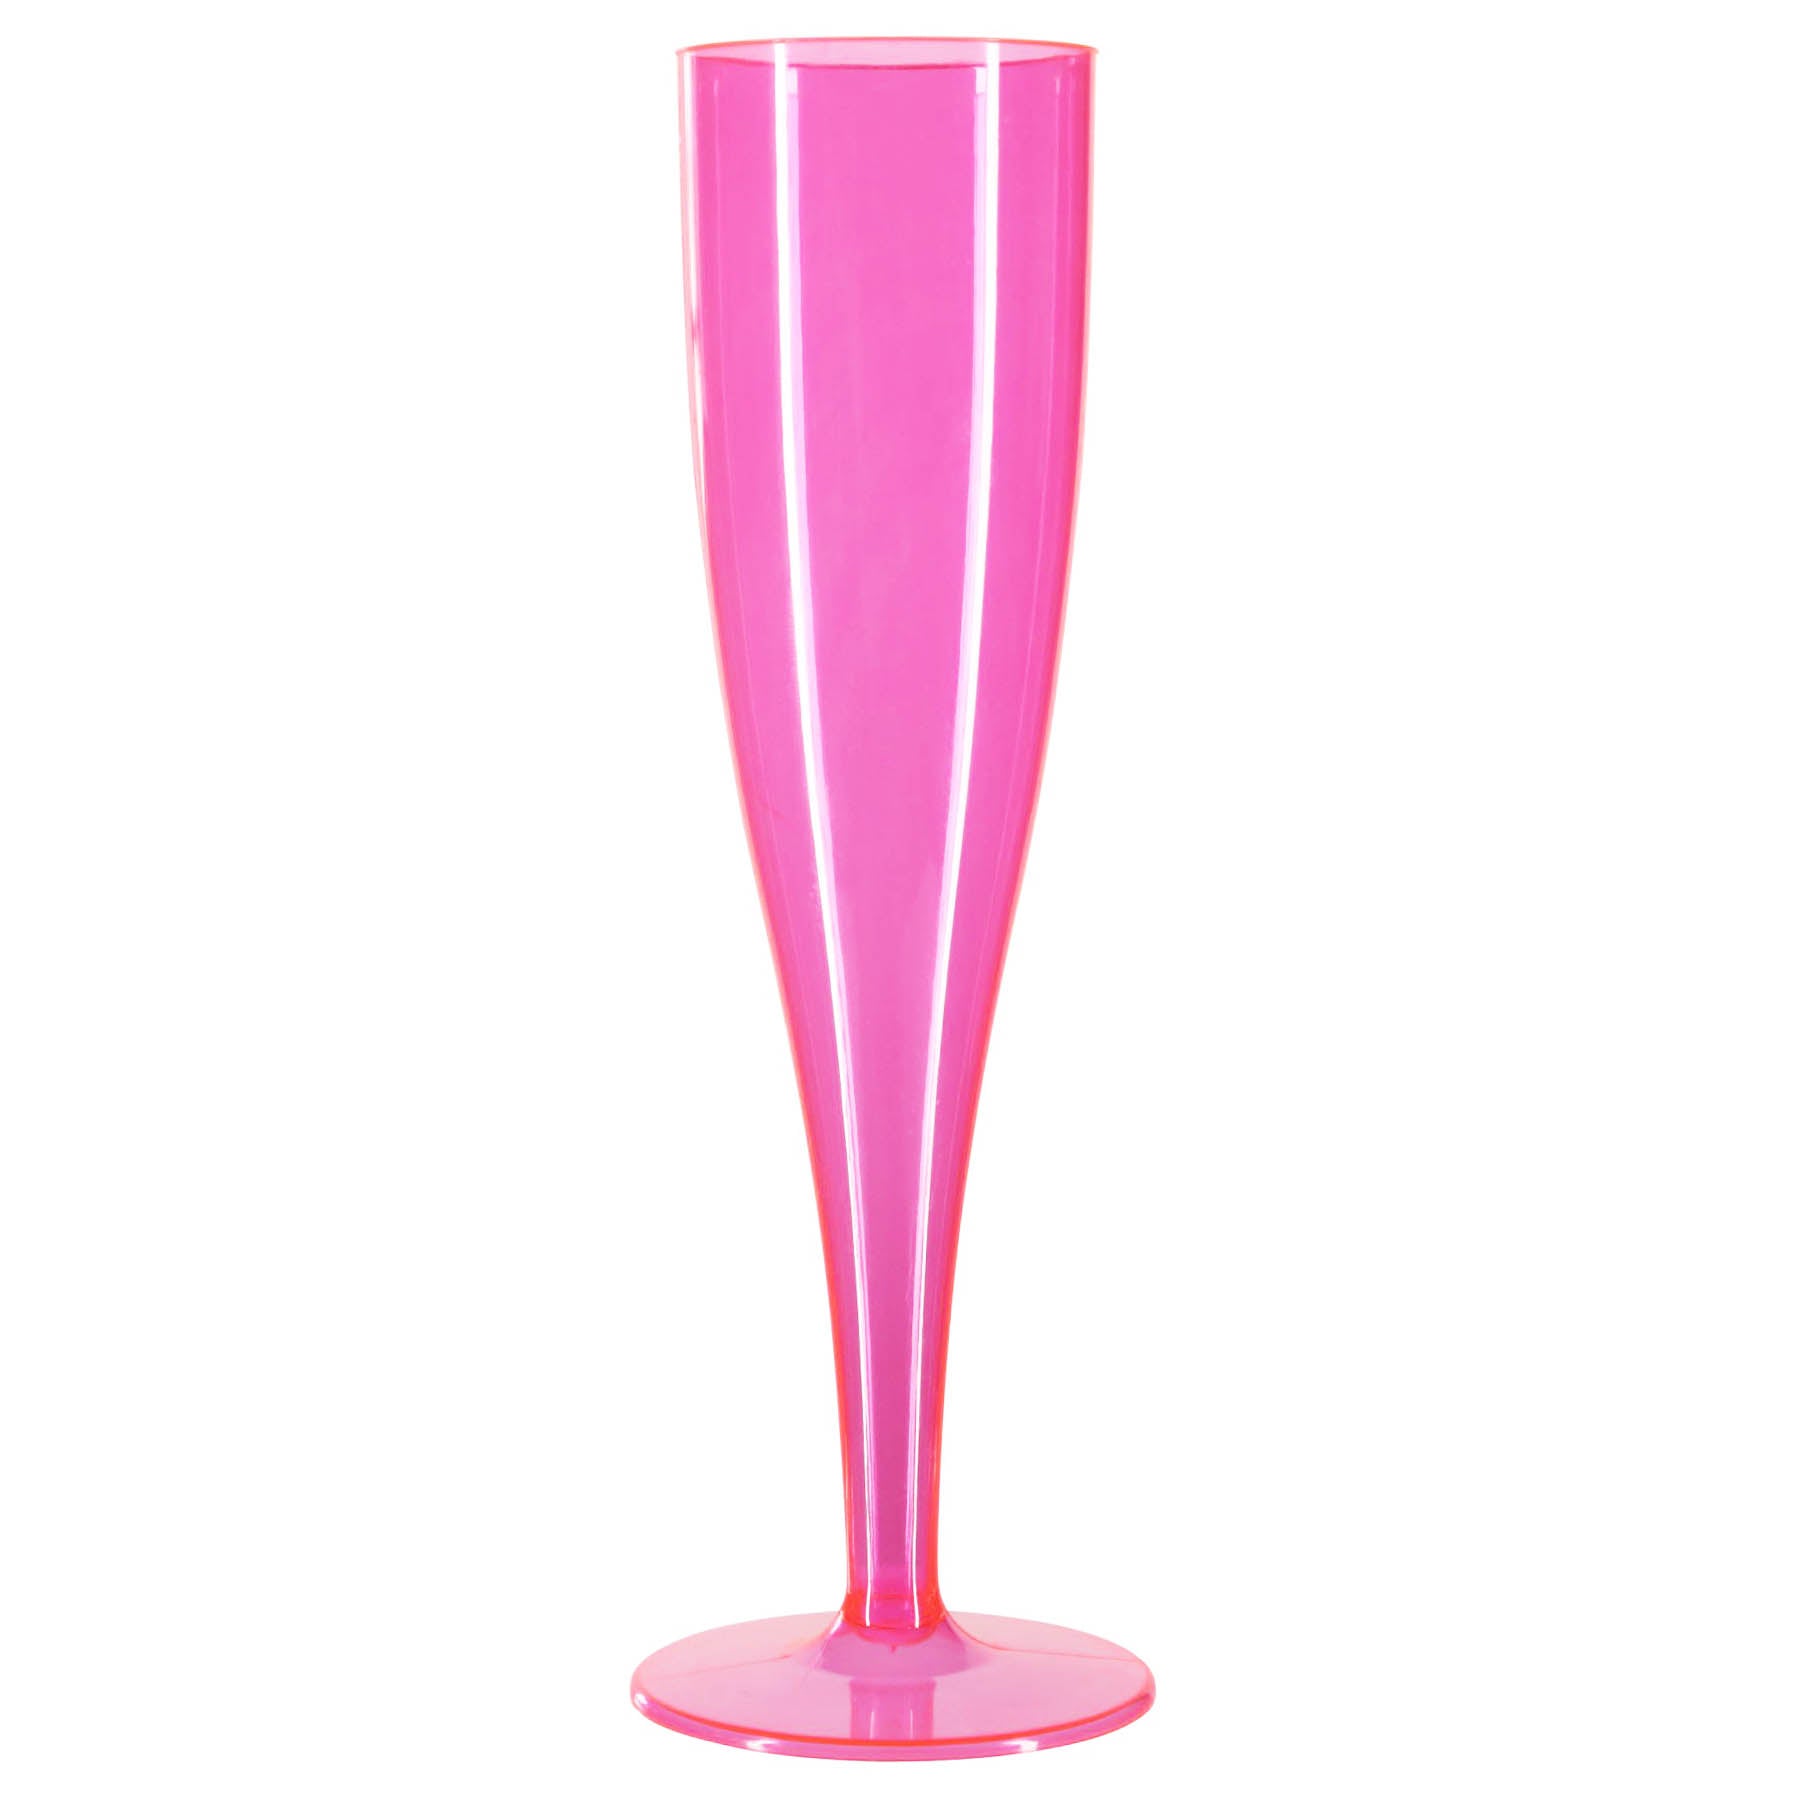 100 x Pink Prosecco Flutes 175ml 6oz Capacity Recyclable Polystyrene Material Transparent 1-Piece Sturdy Champagne Glasses BBQs Picnics-5056020107163-PCUP-CHAMPPINKx10-Product Pro-Champagne Glasses, Clear Champagne Glasses, Pink, Plastic Flutes, Prosecco Flutes